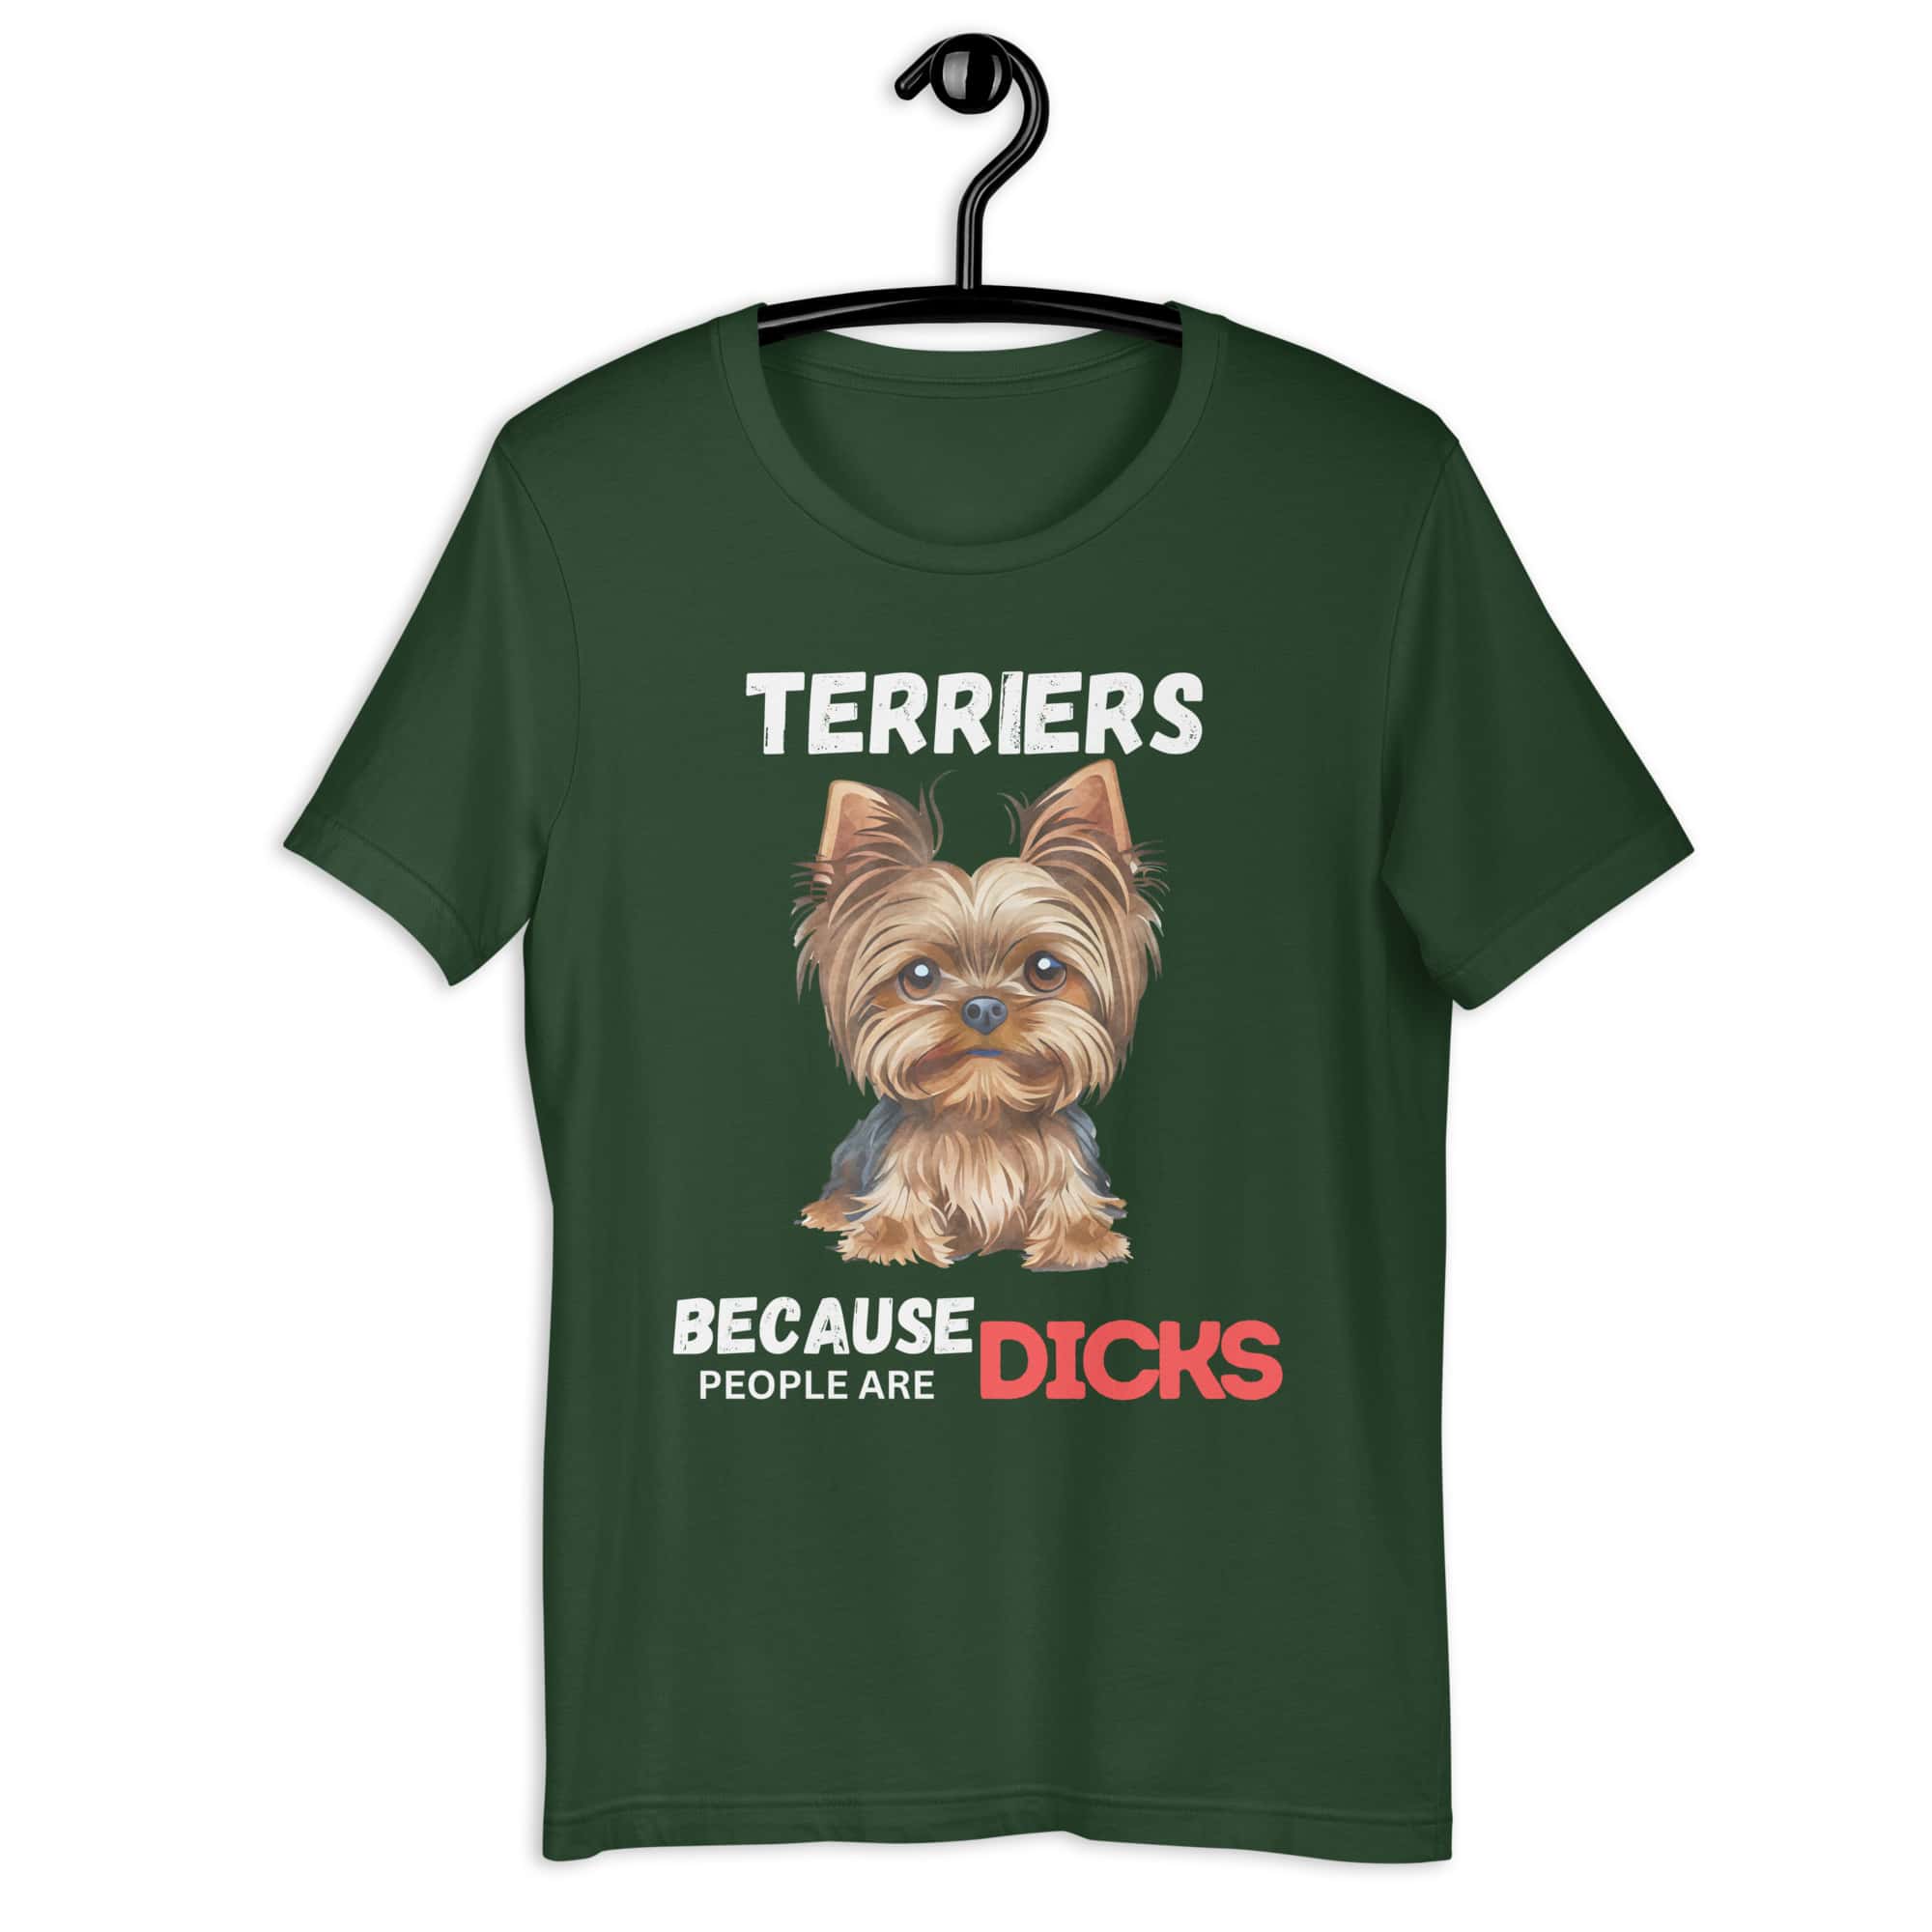 Yorkshire Terriers Because People Are Dicks Unisex T-Shirt - dark green